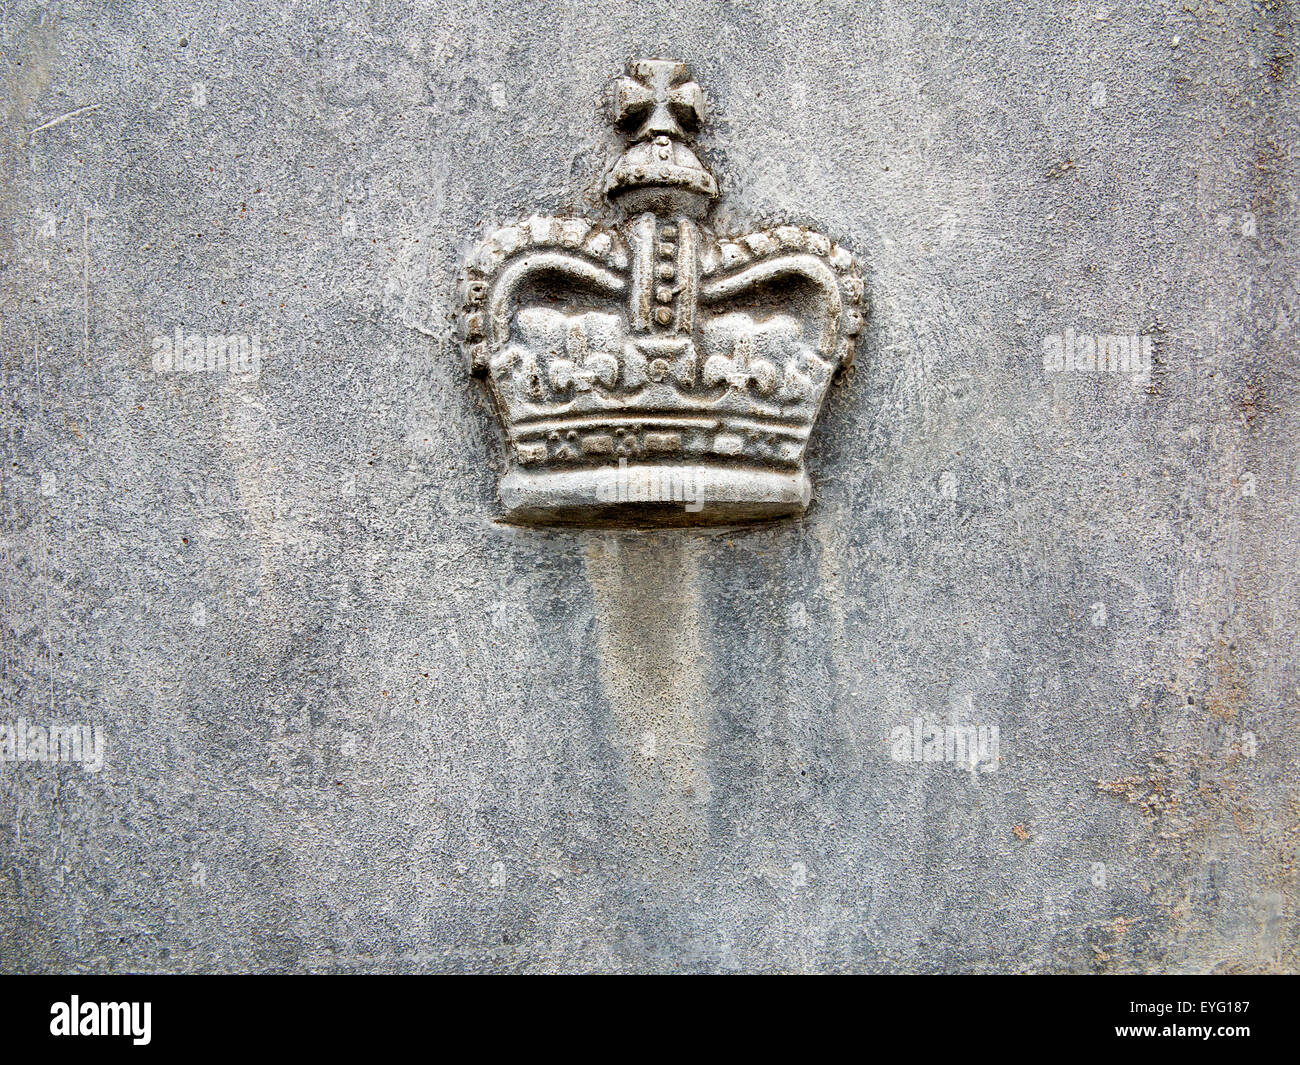 A Royal Crown motif cast in lead on the side of a lead planter Stock Photo